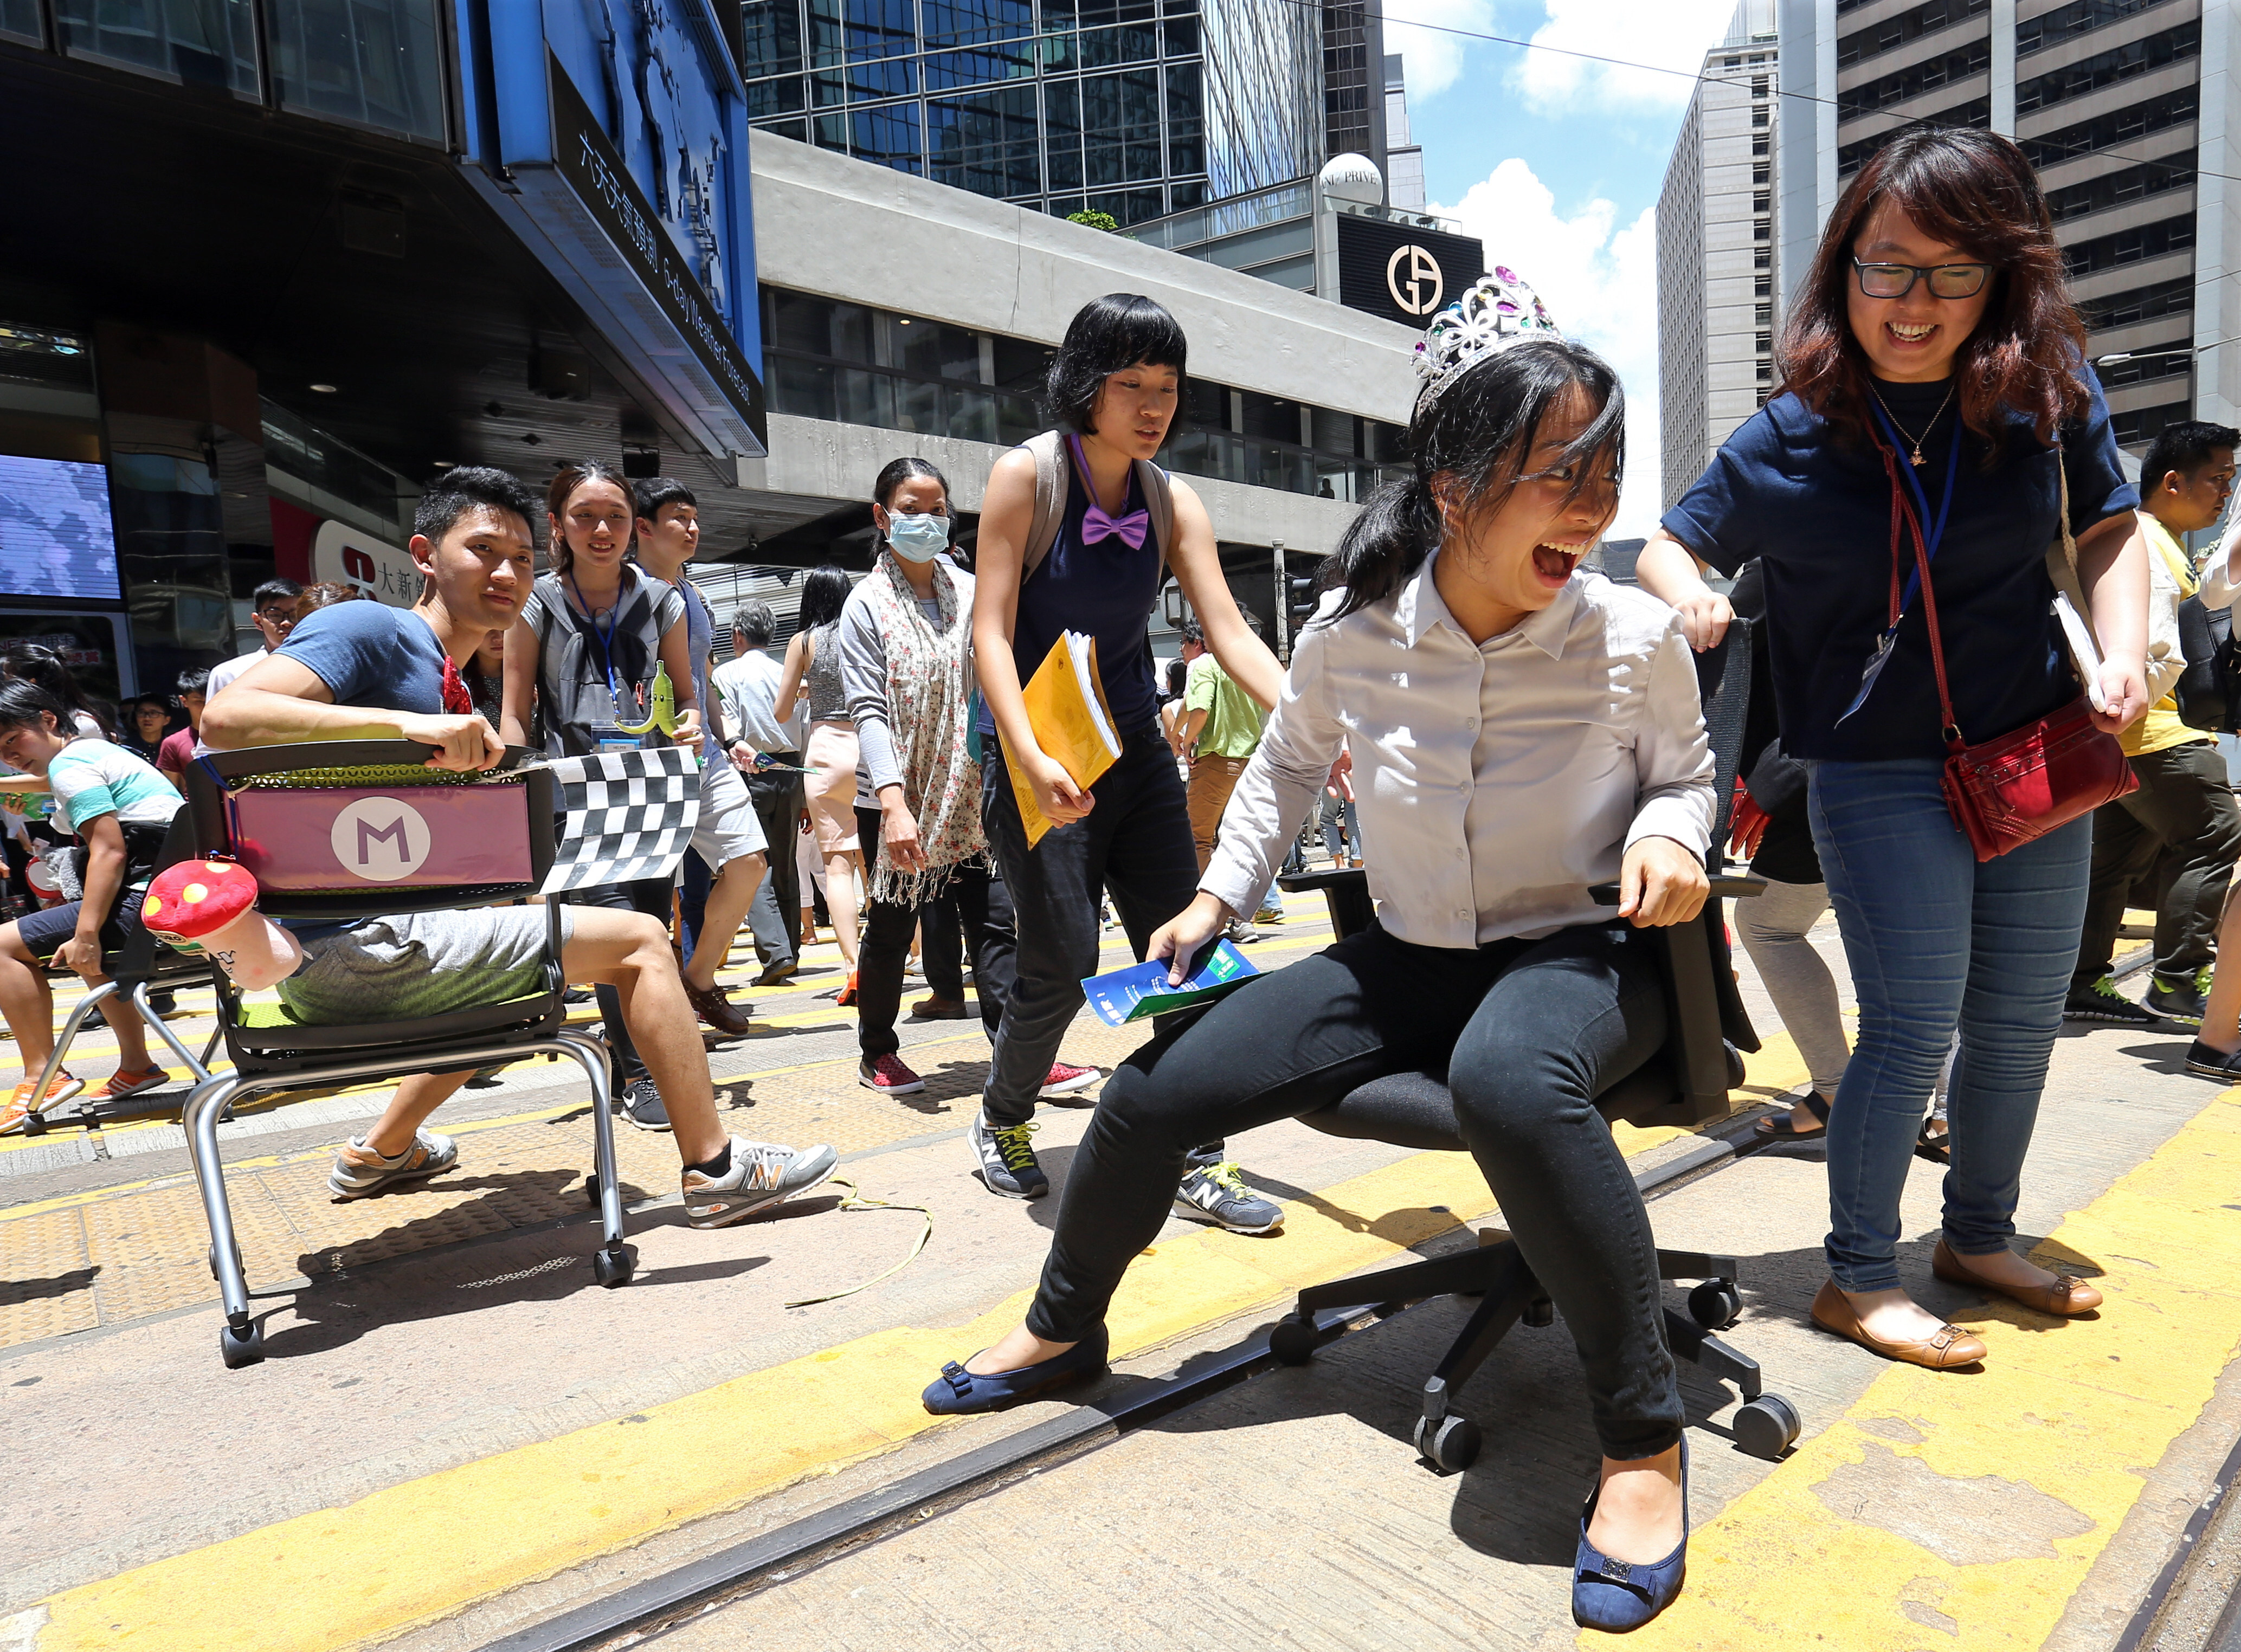 Campaigners from a non-profit group take part in an event in Hong Kong’s Central district in June 2016, to raise awareness of air pollution and call for pedestrianisation. Photo: Dickson Lee